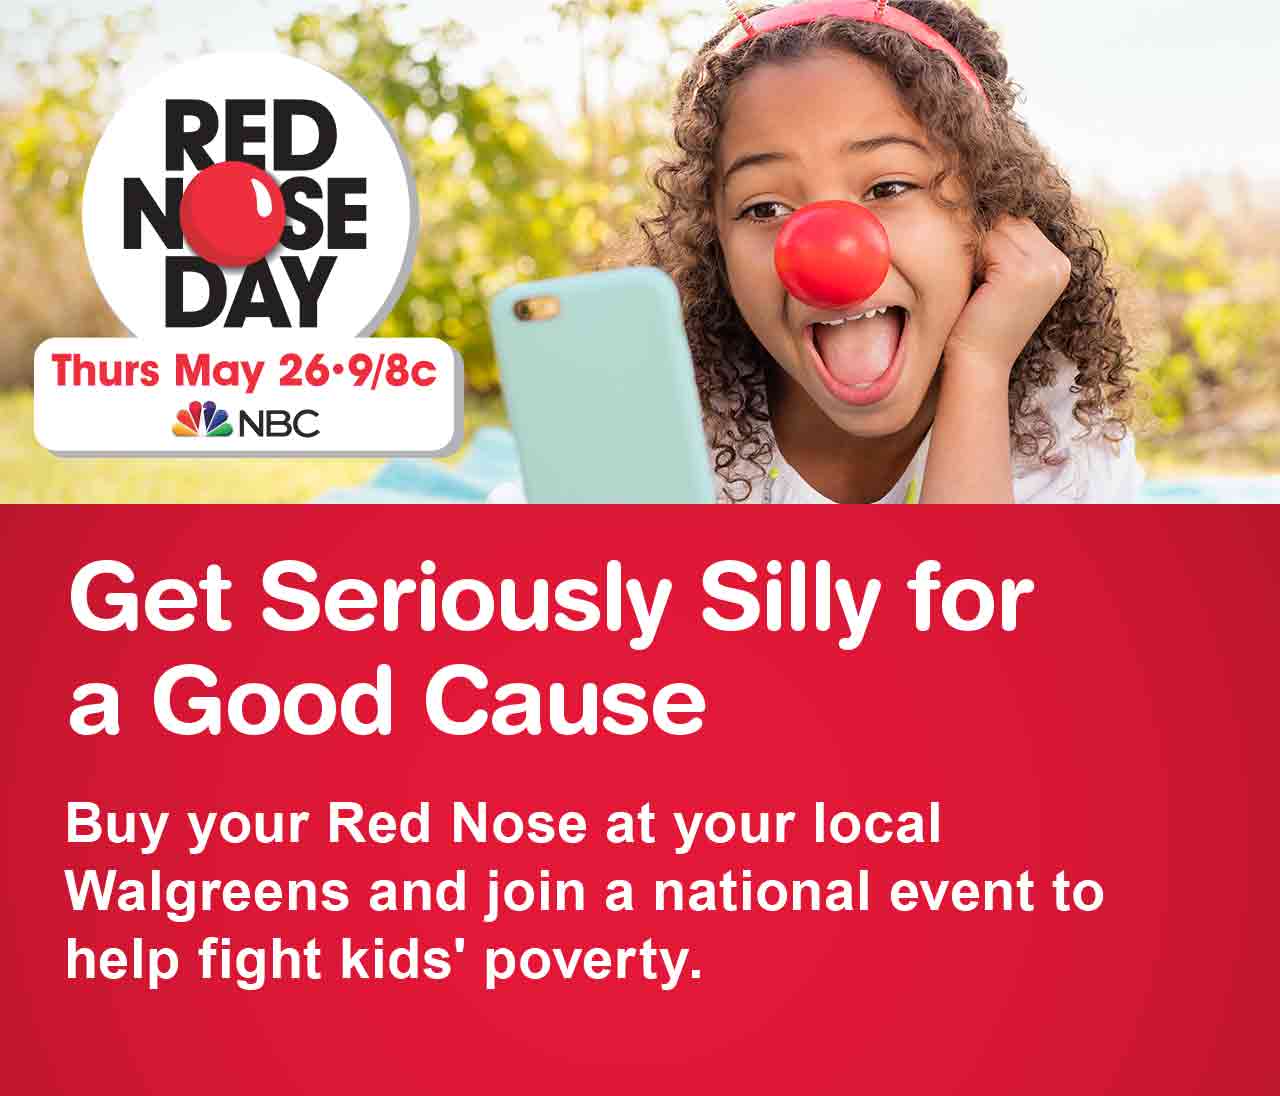 What Is Red Nose Day 2016 Comic Relief - Wikipedia